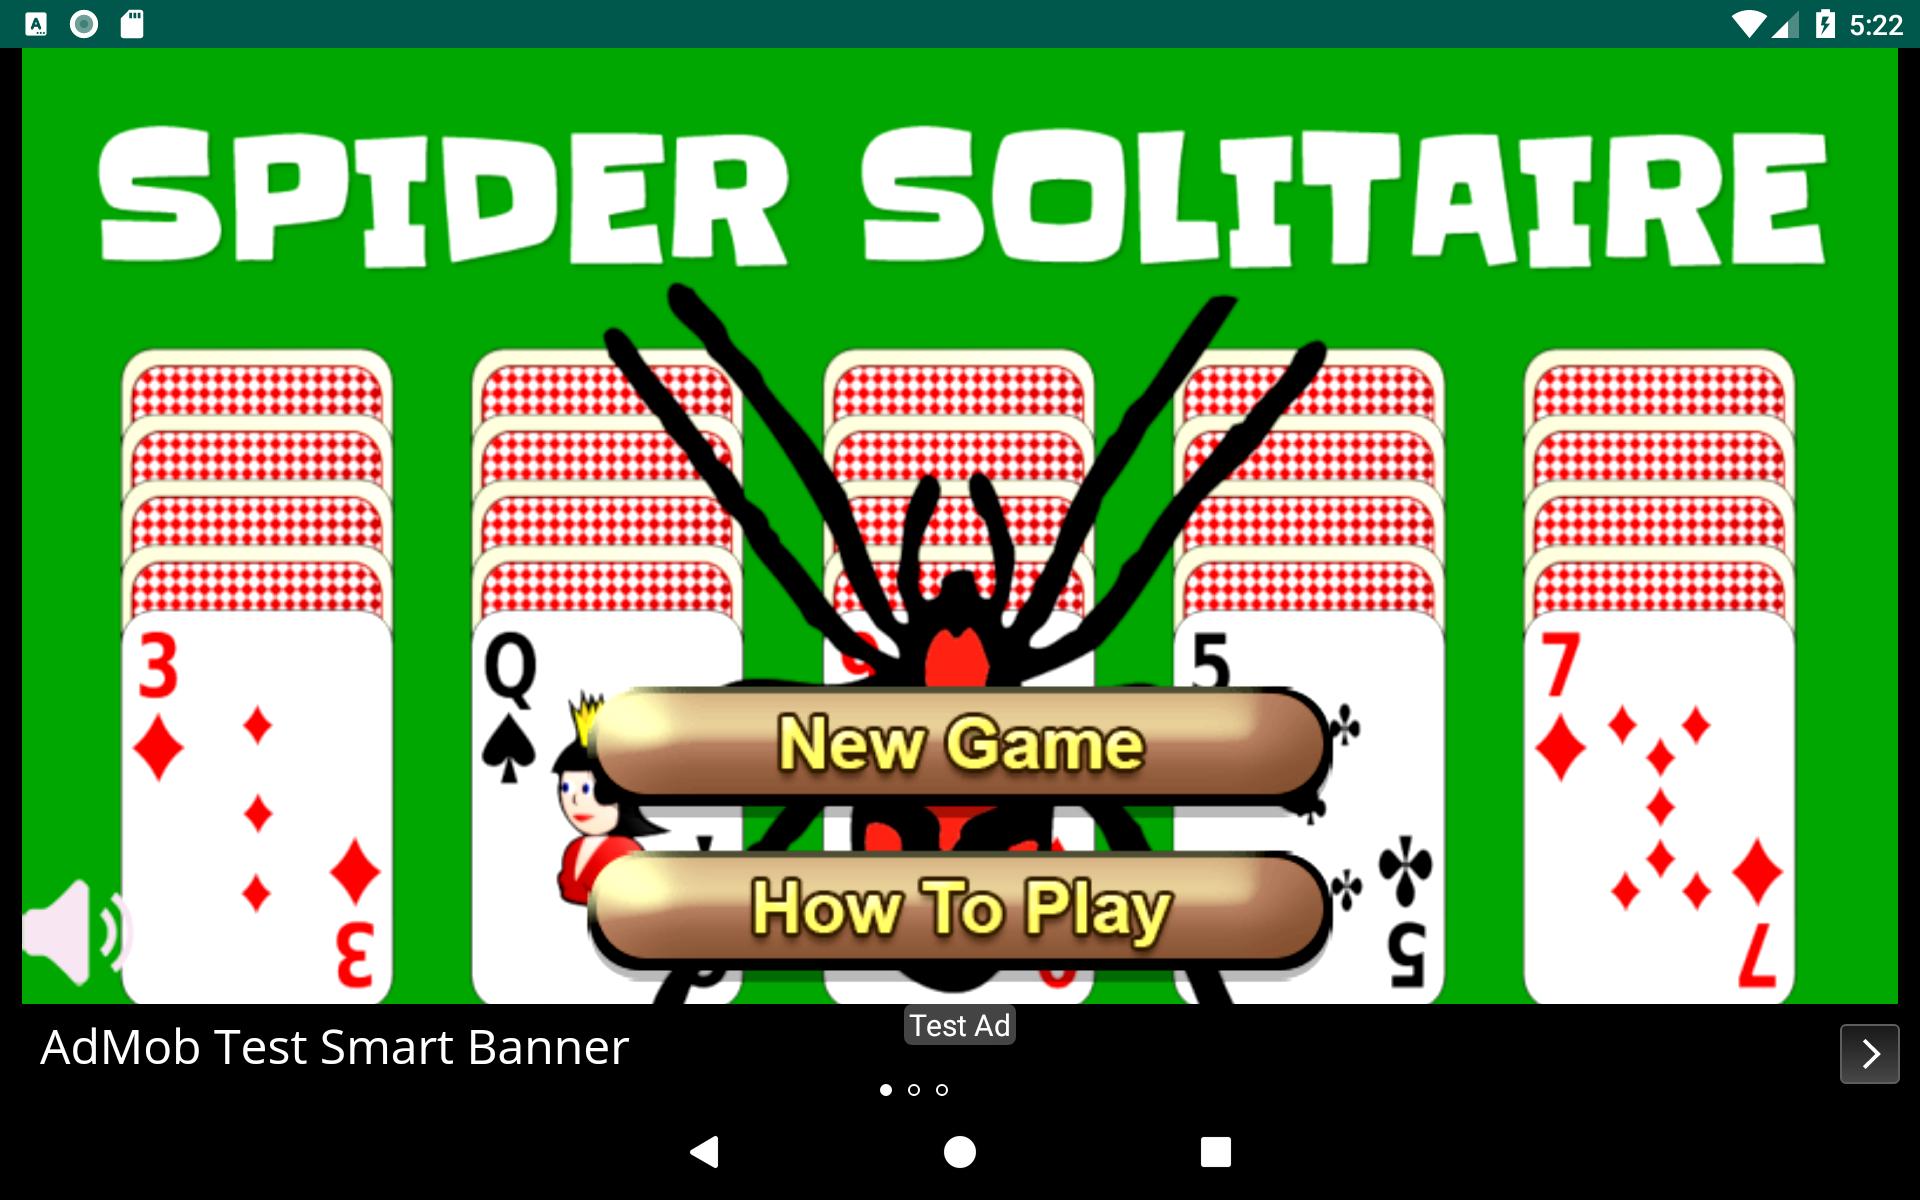 Spider Solitaire 2019 For Android Apk Download - 13 best photos of 728x90 banner ad 728x90 roblox ad banner